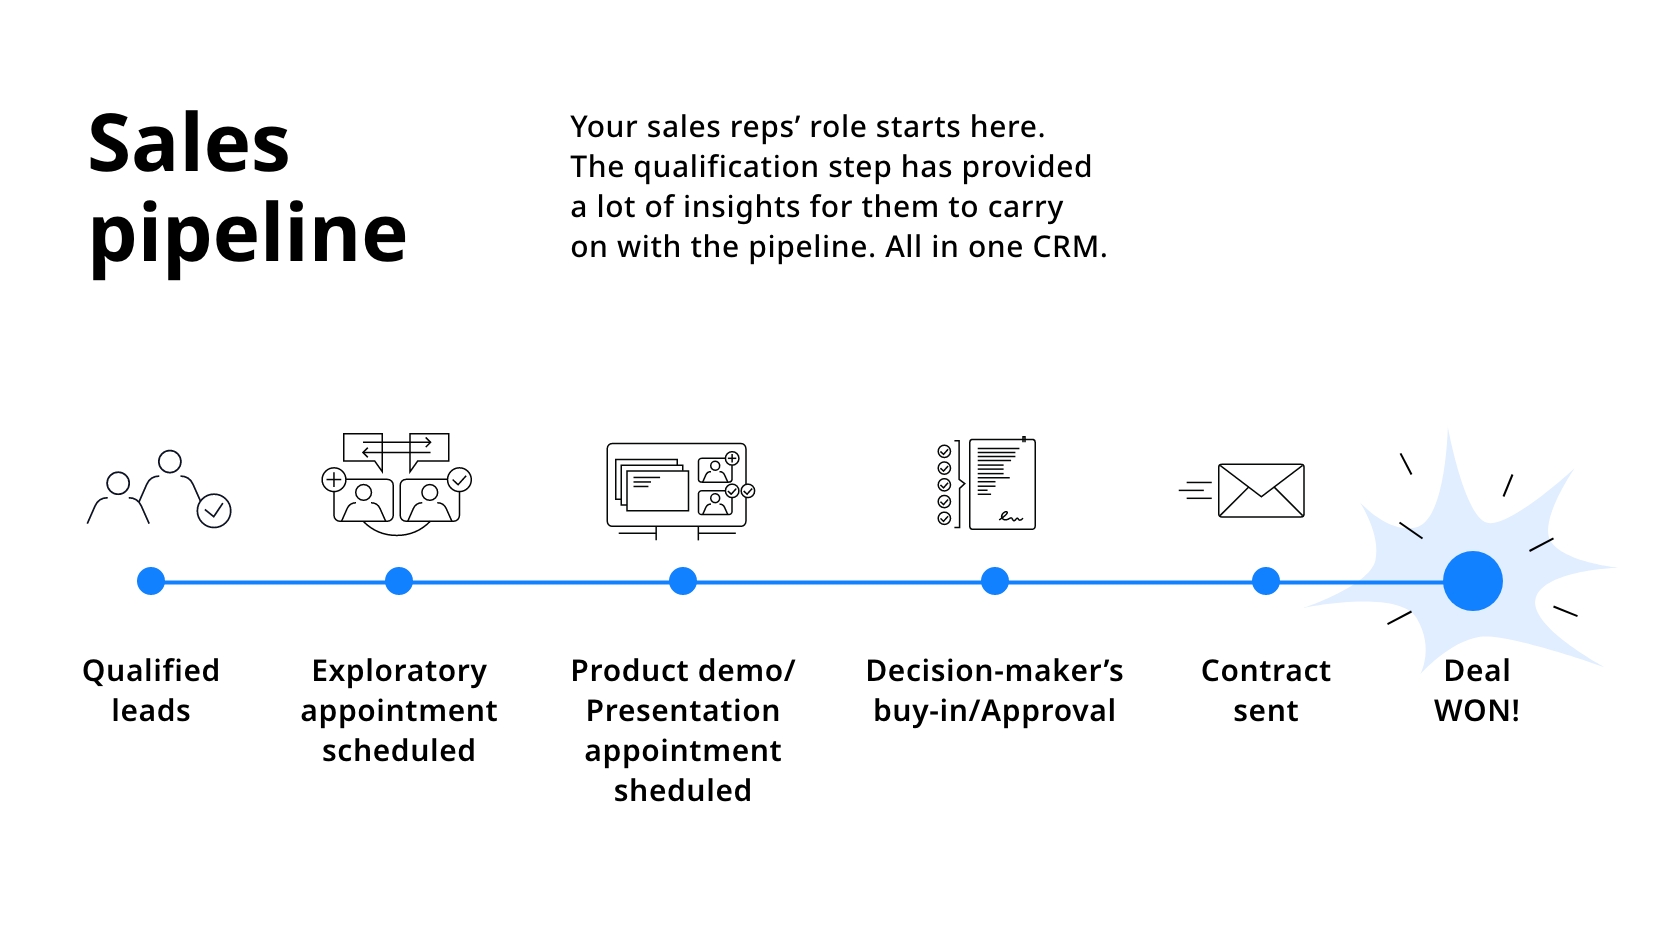 Sales pipeline graphic illustrating each step of the process.